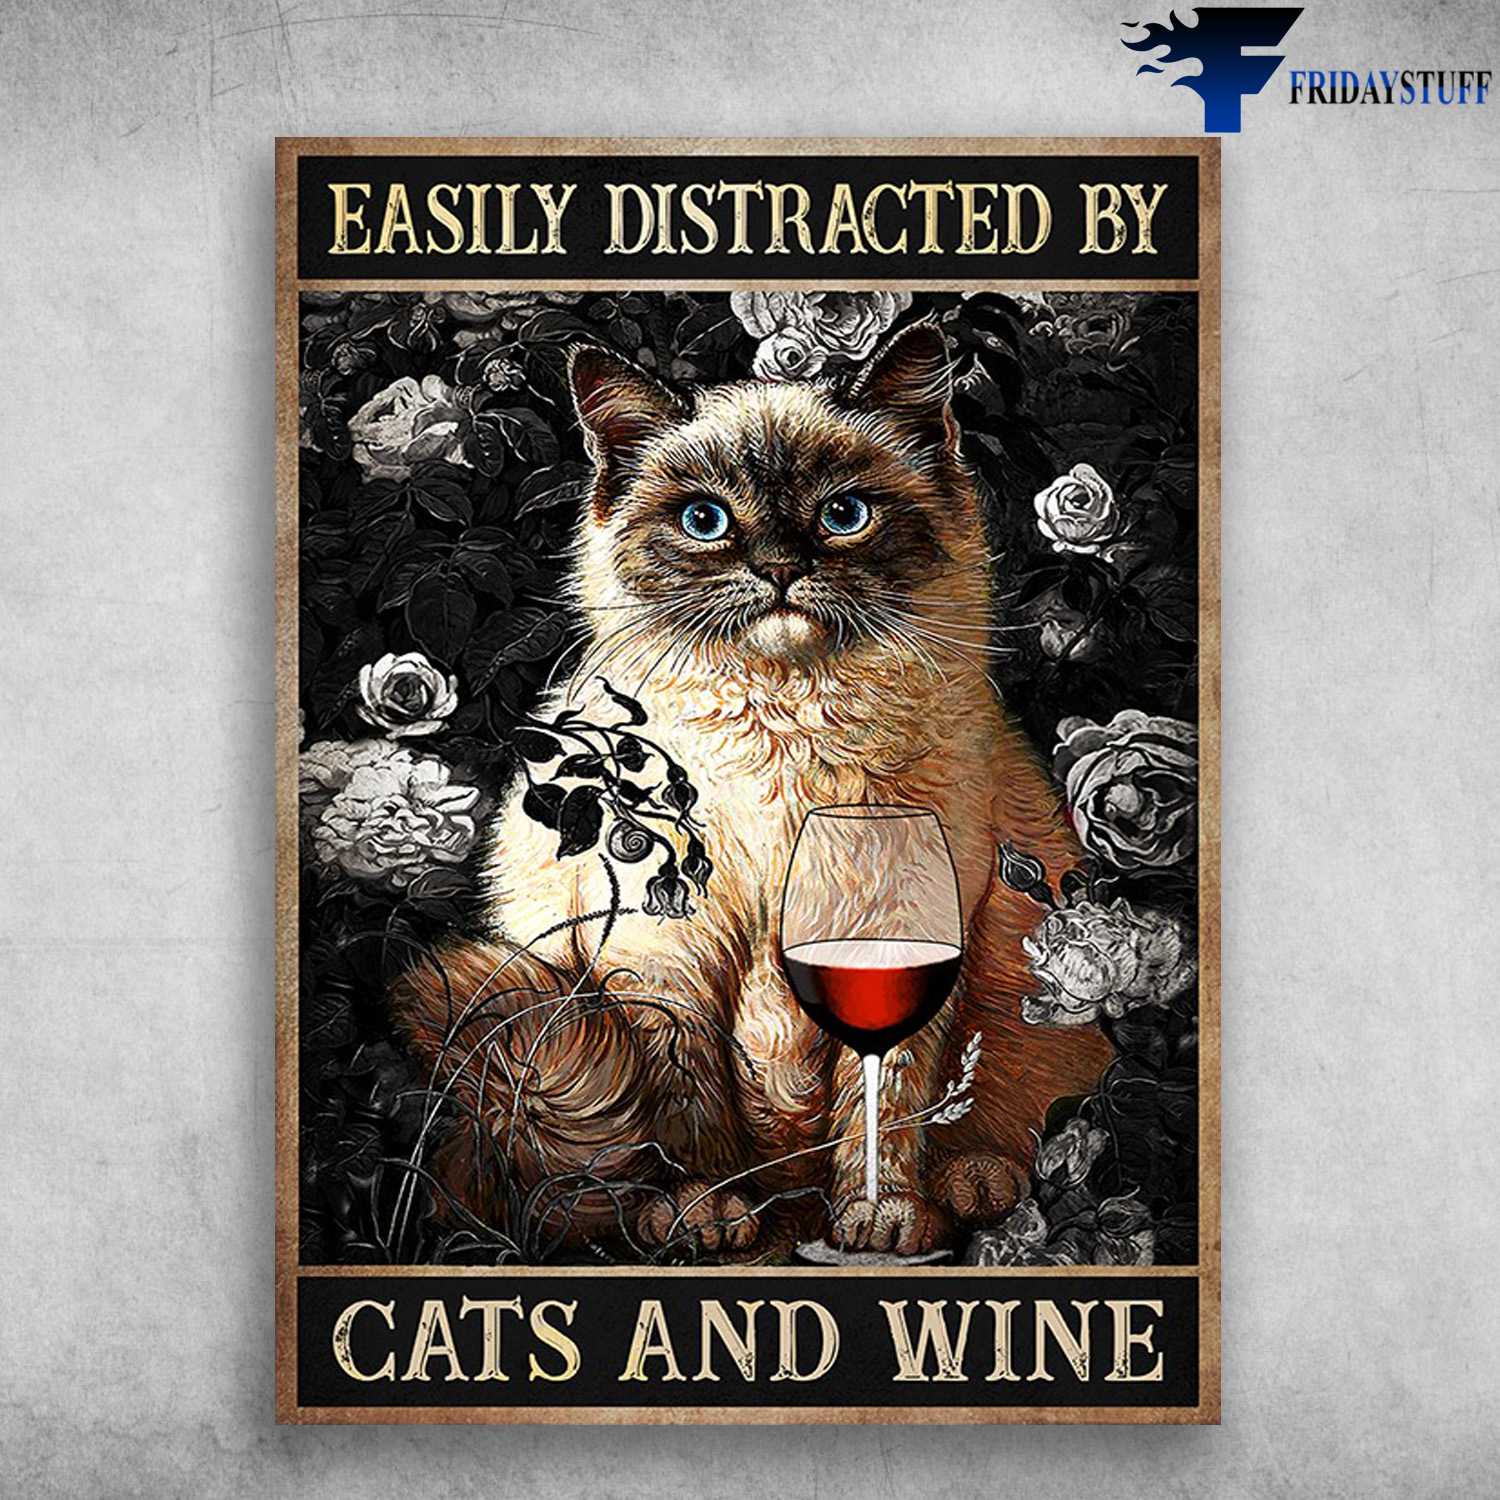 Himmie Cat, Wine Lover - Easily Distracted By, Cat And Wine